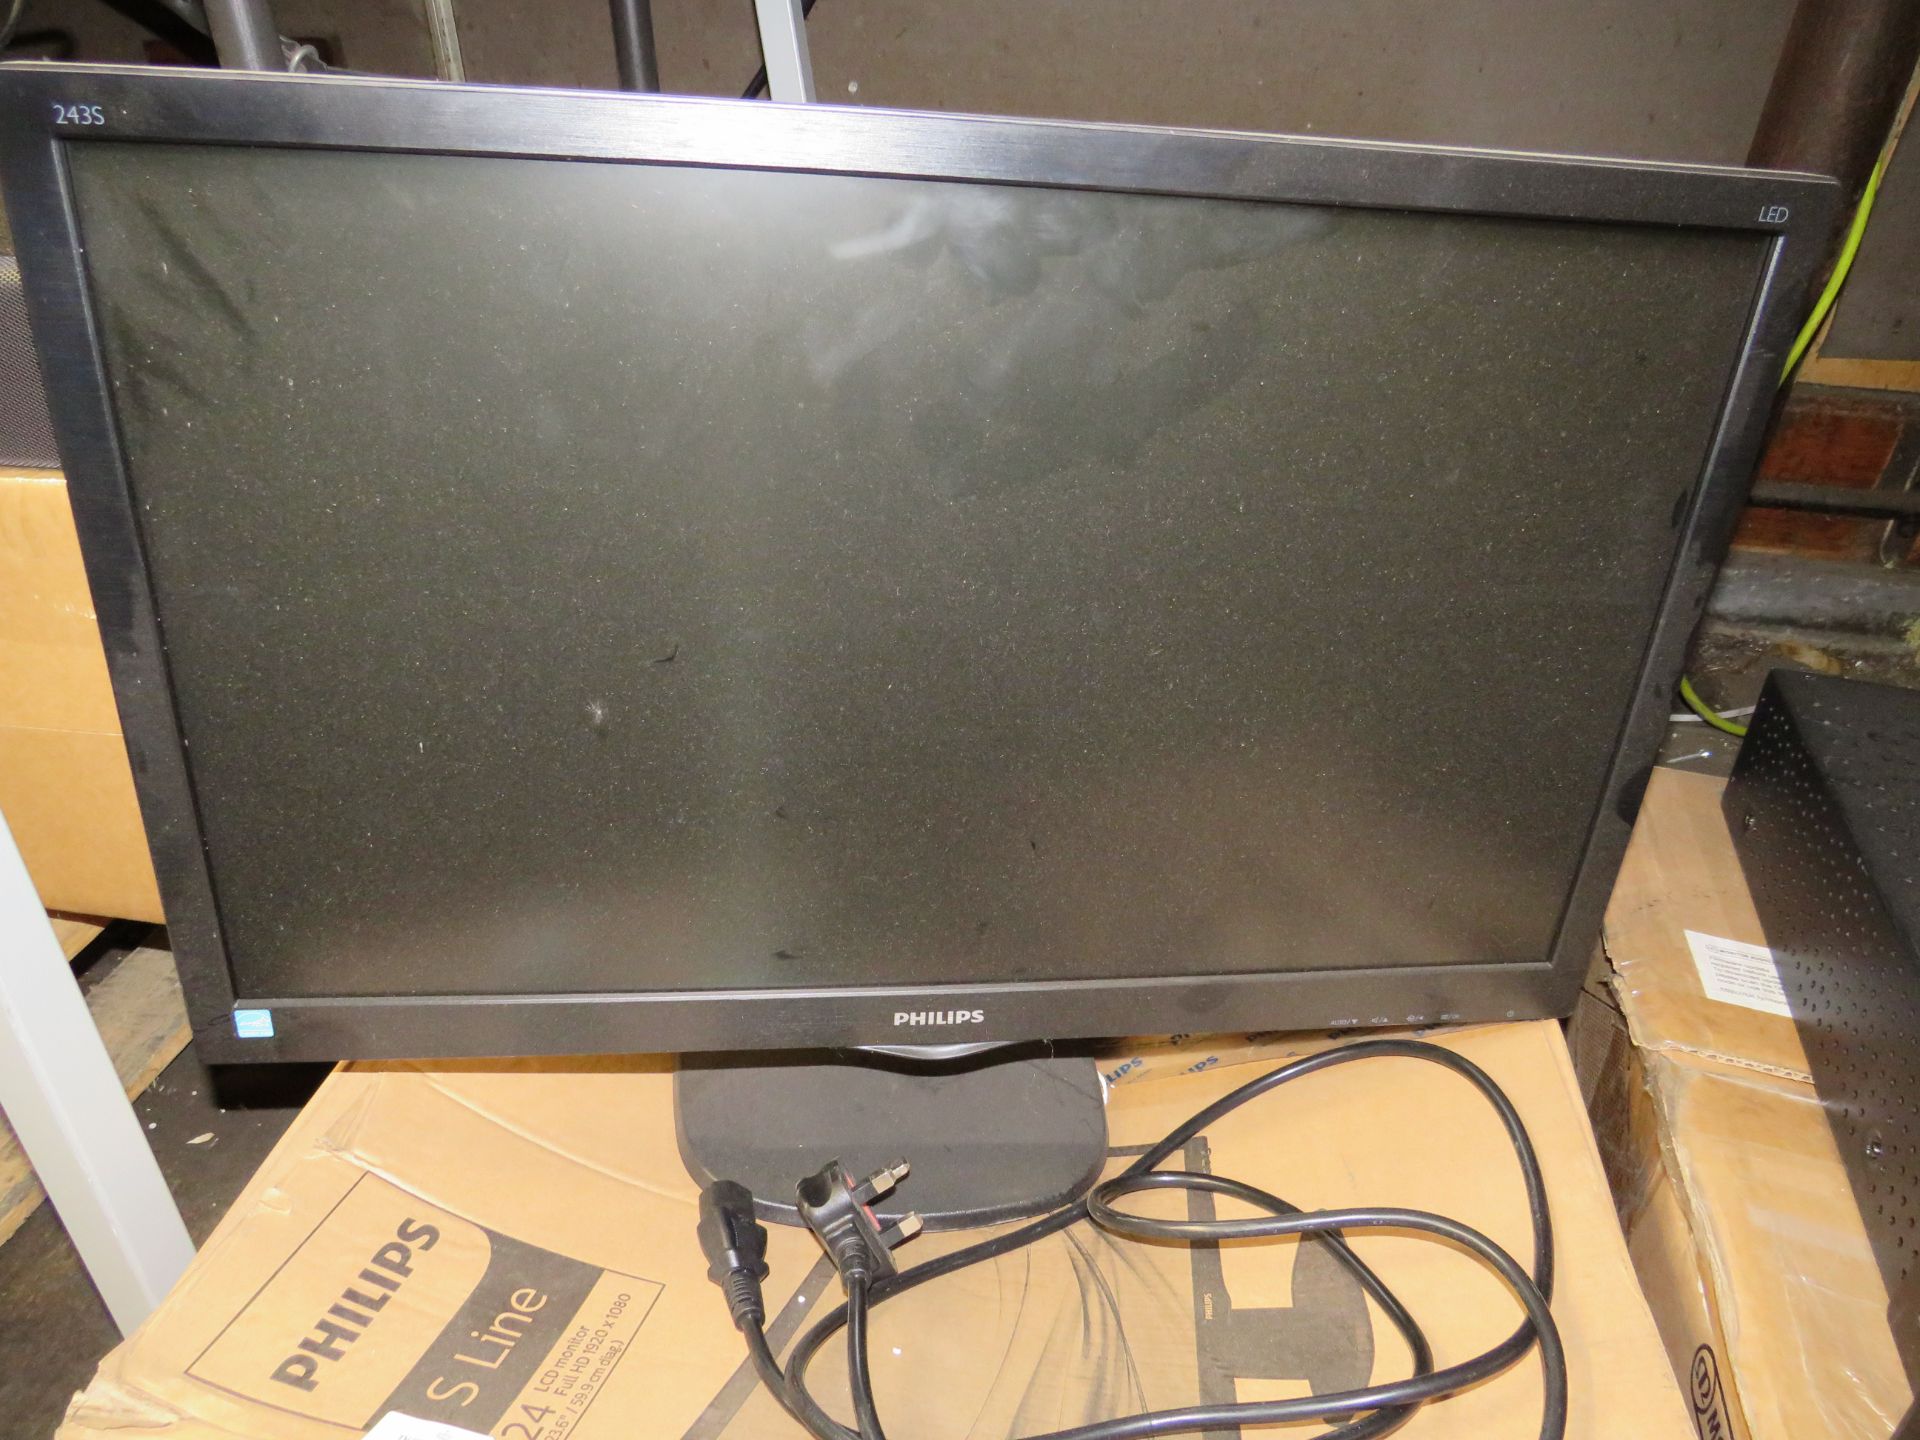 Phillips B Line 24" ; LCD Monitor with Full HD powers on and seems to work as designed , all